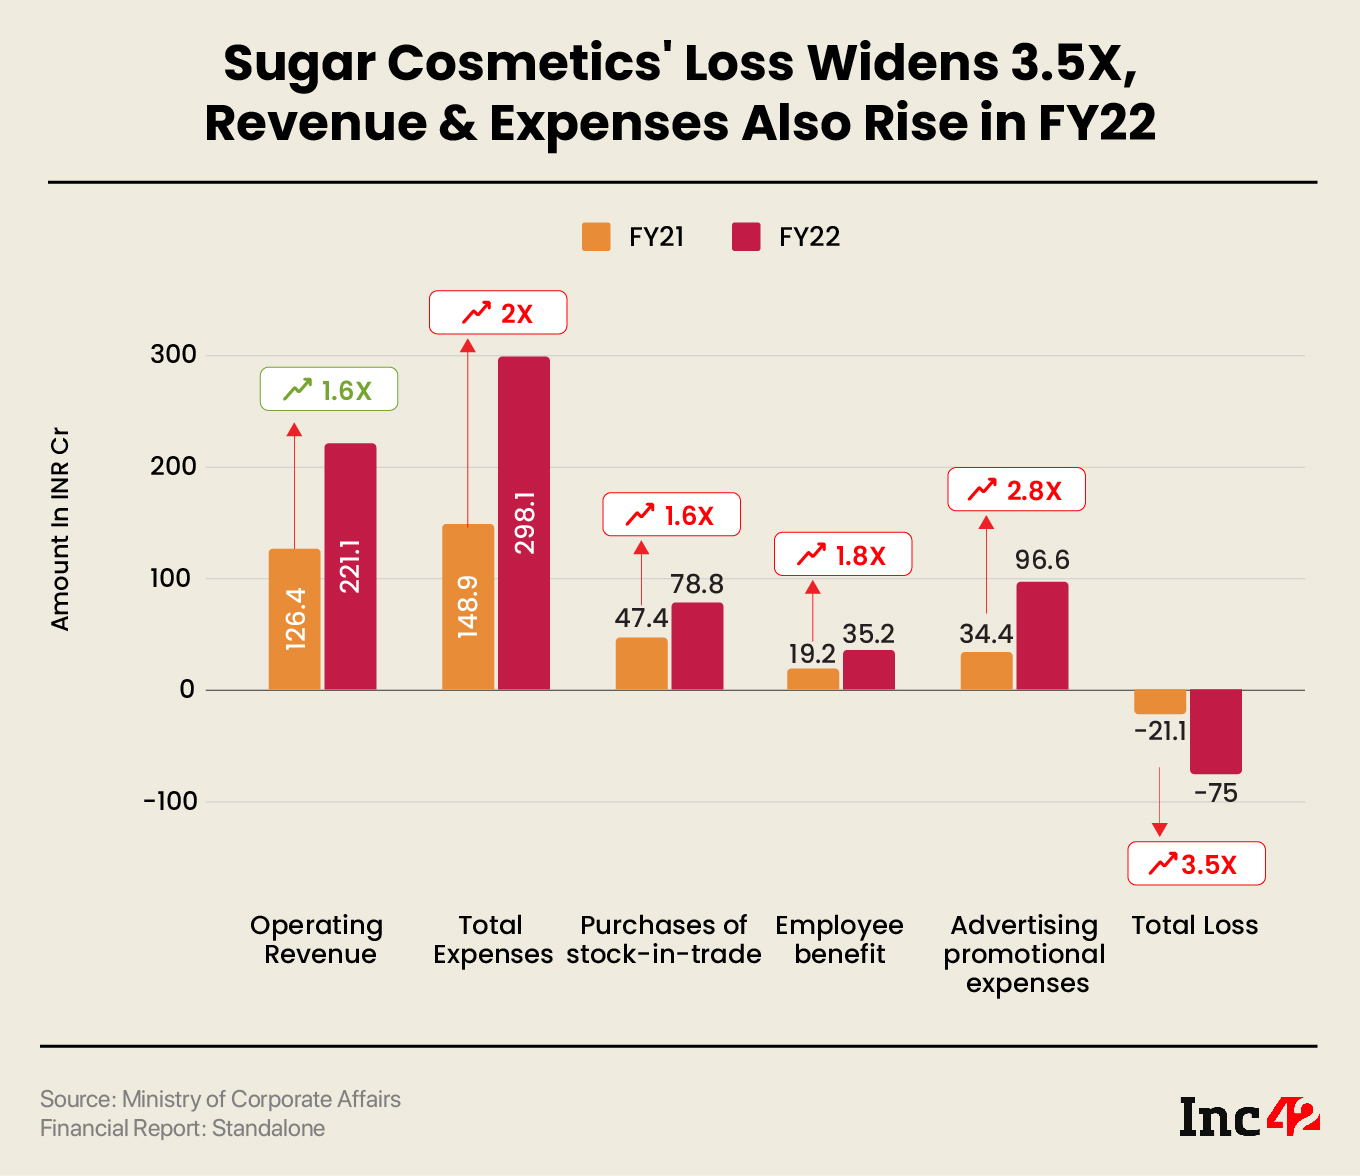 HL: Sugar Cosmetics' Loss Widens 3.5X, Revenue & Expenses Also Rise in FY22